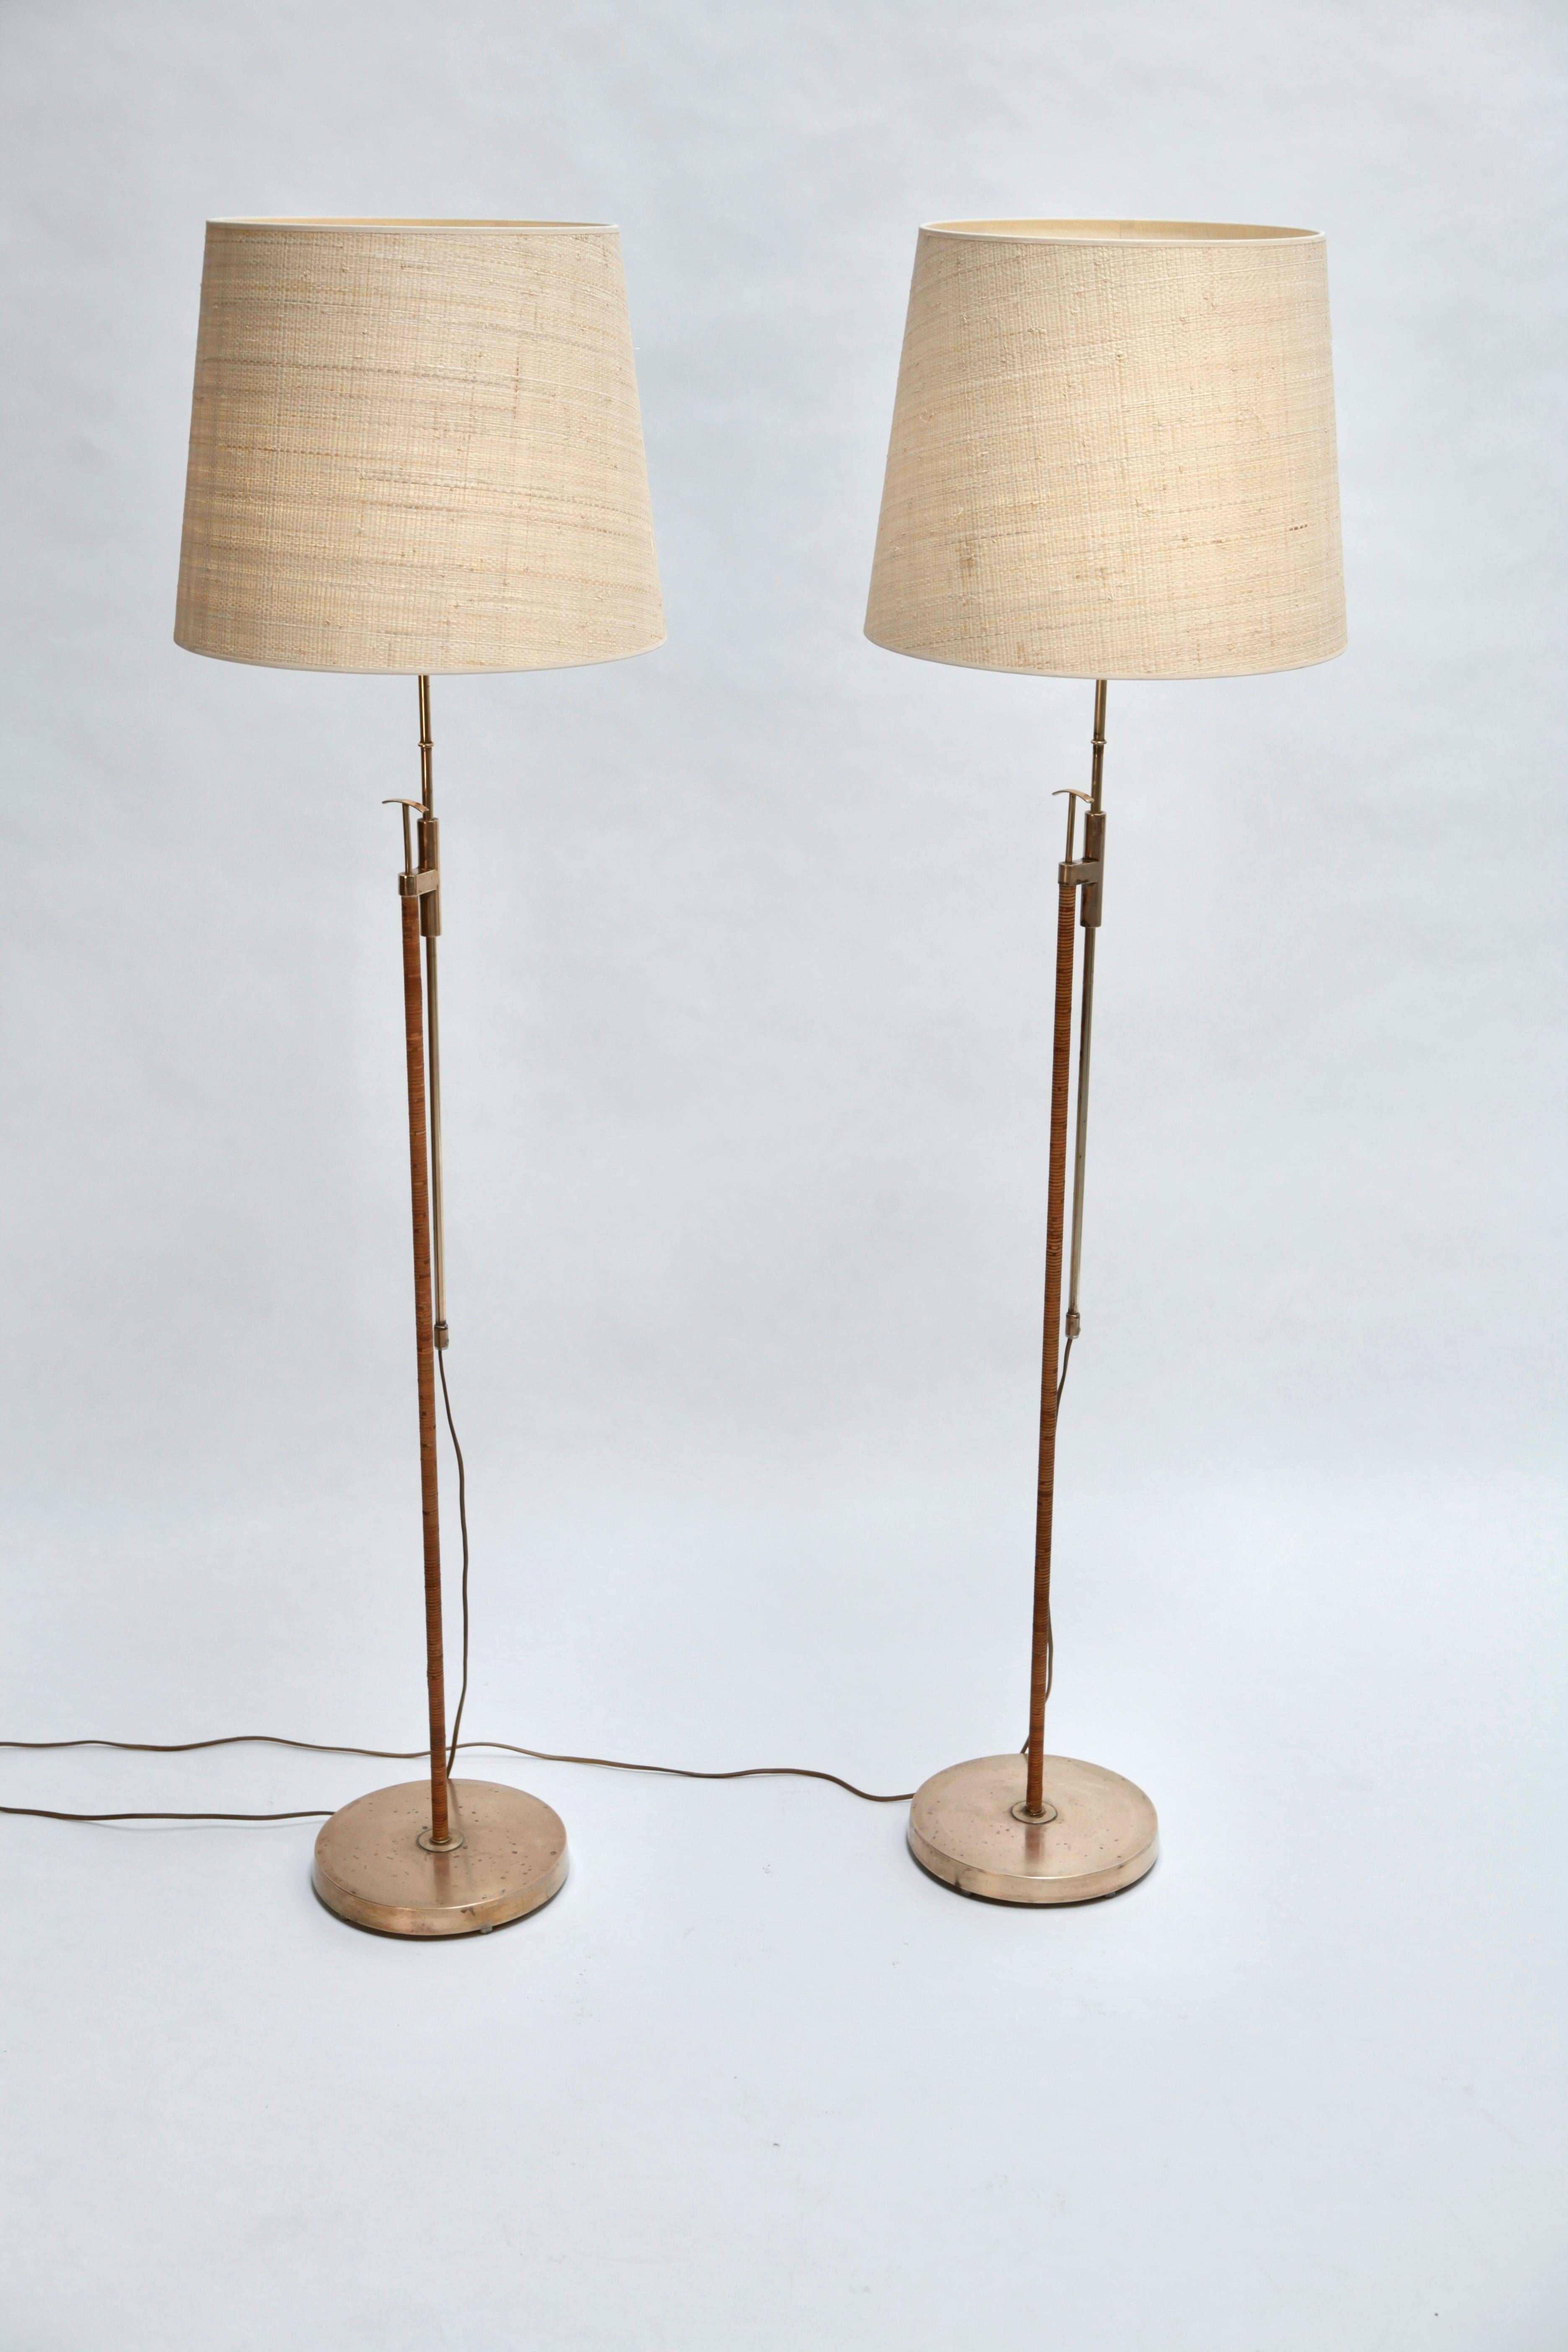 A pair of Scandinavian Modern rattan & brass floor-lamps, in the style of Paavo Tynell.
Manufactured in the 1940s. Nice patina to the brass, the Rattan without damages.
Excellent vintage condition.
Sold without the shades.
Adjustable heigth,